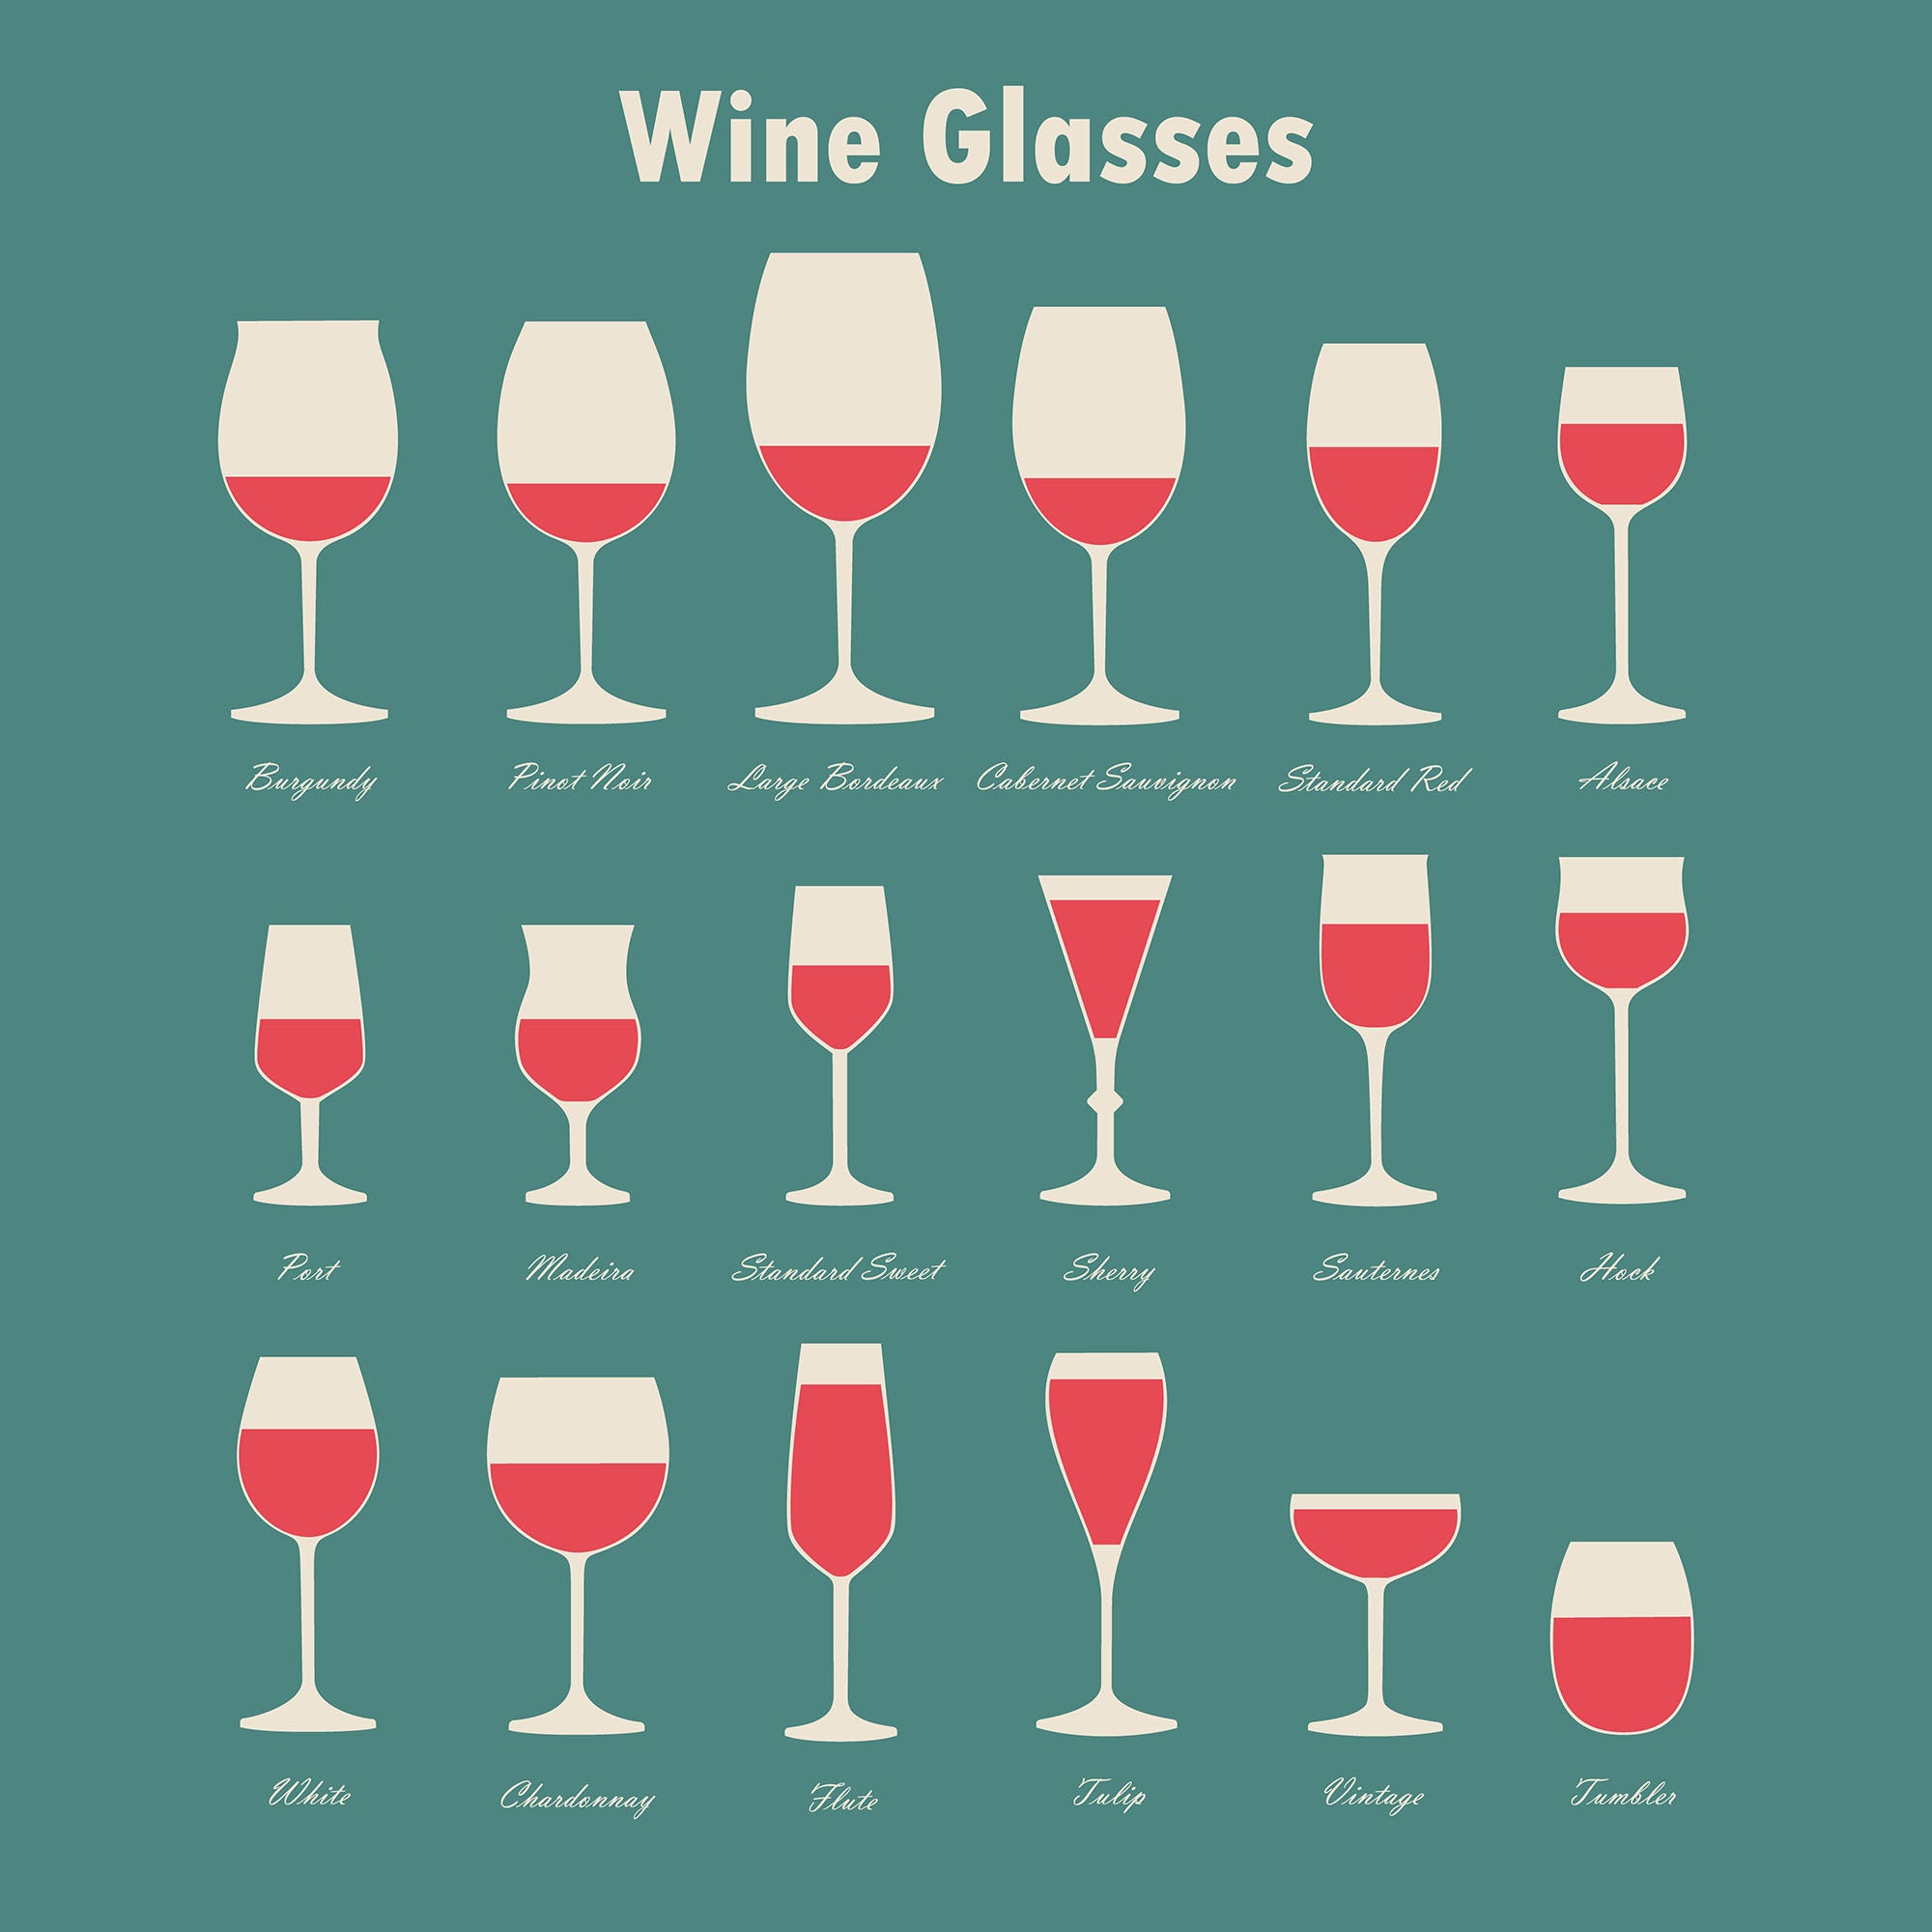 Types Of Glasses Chart